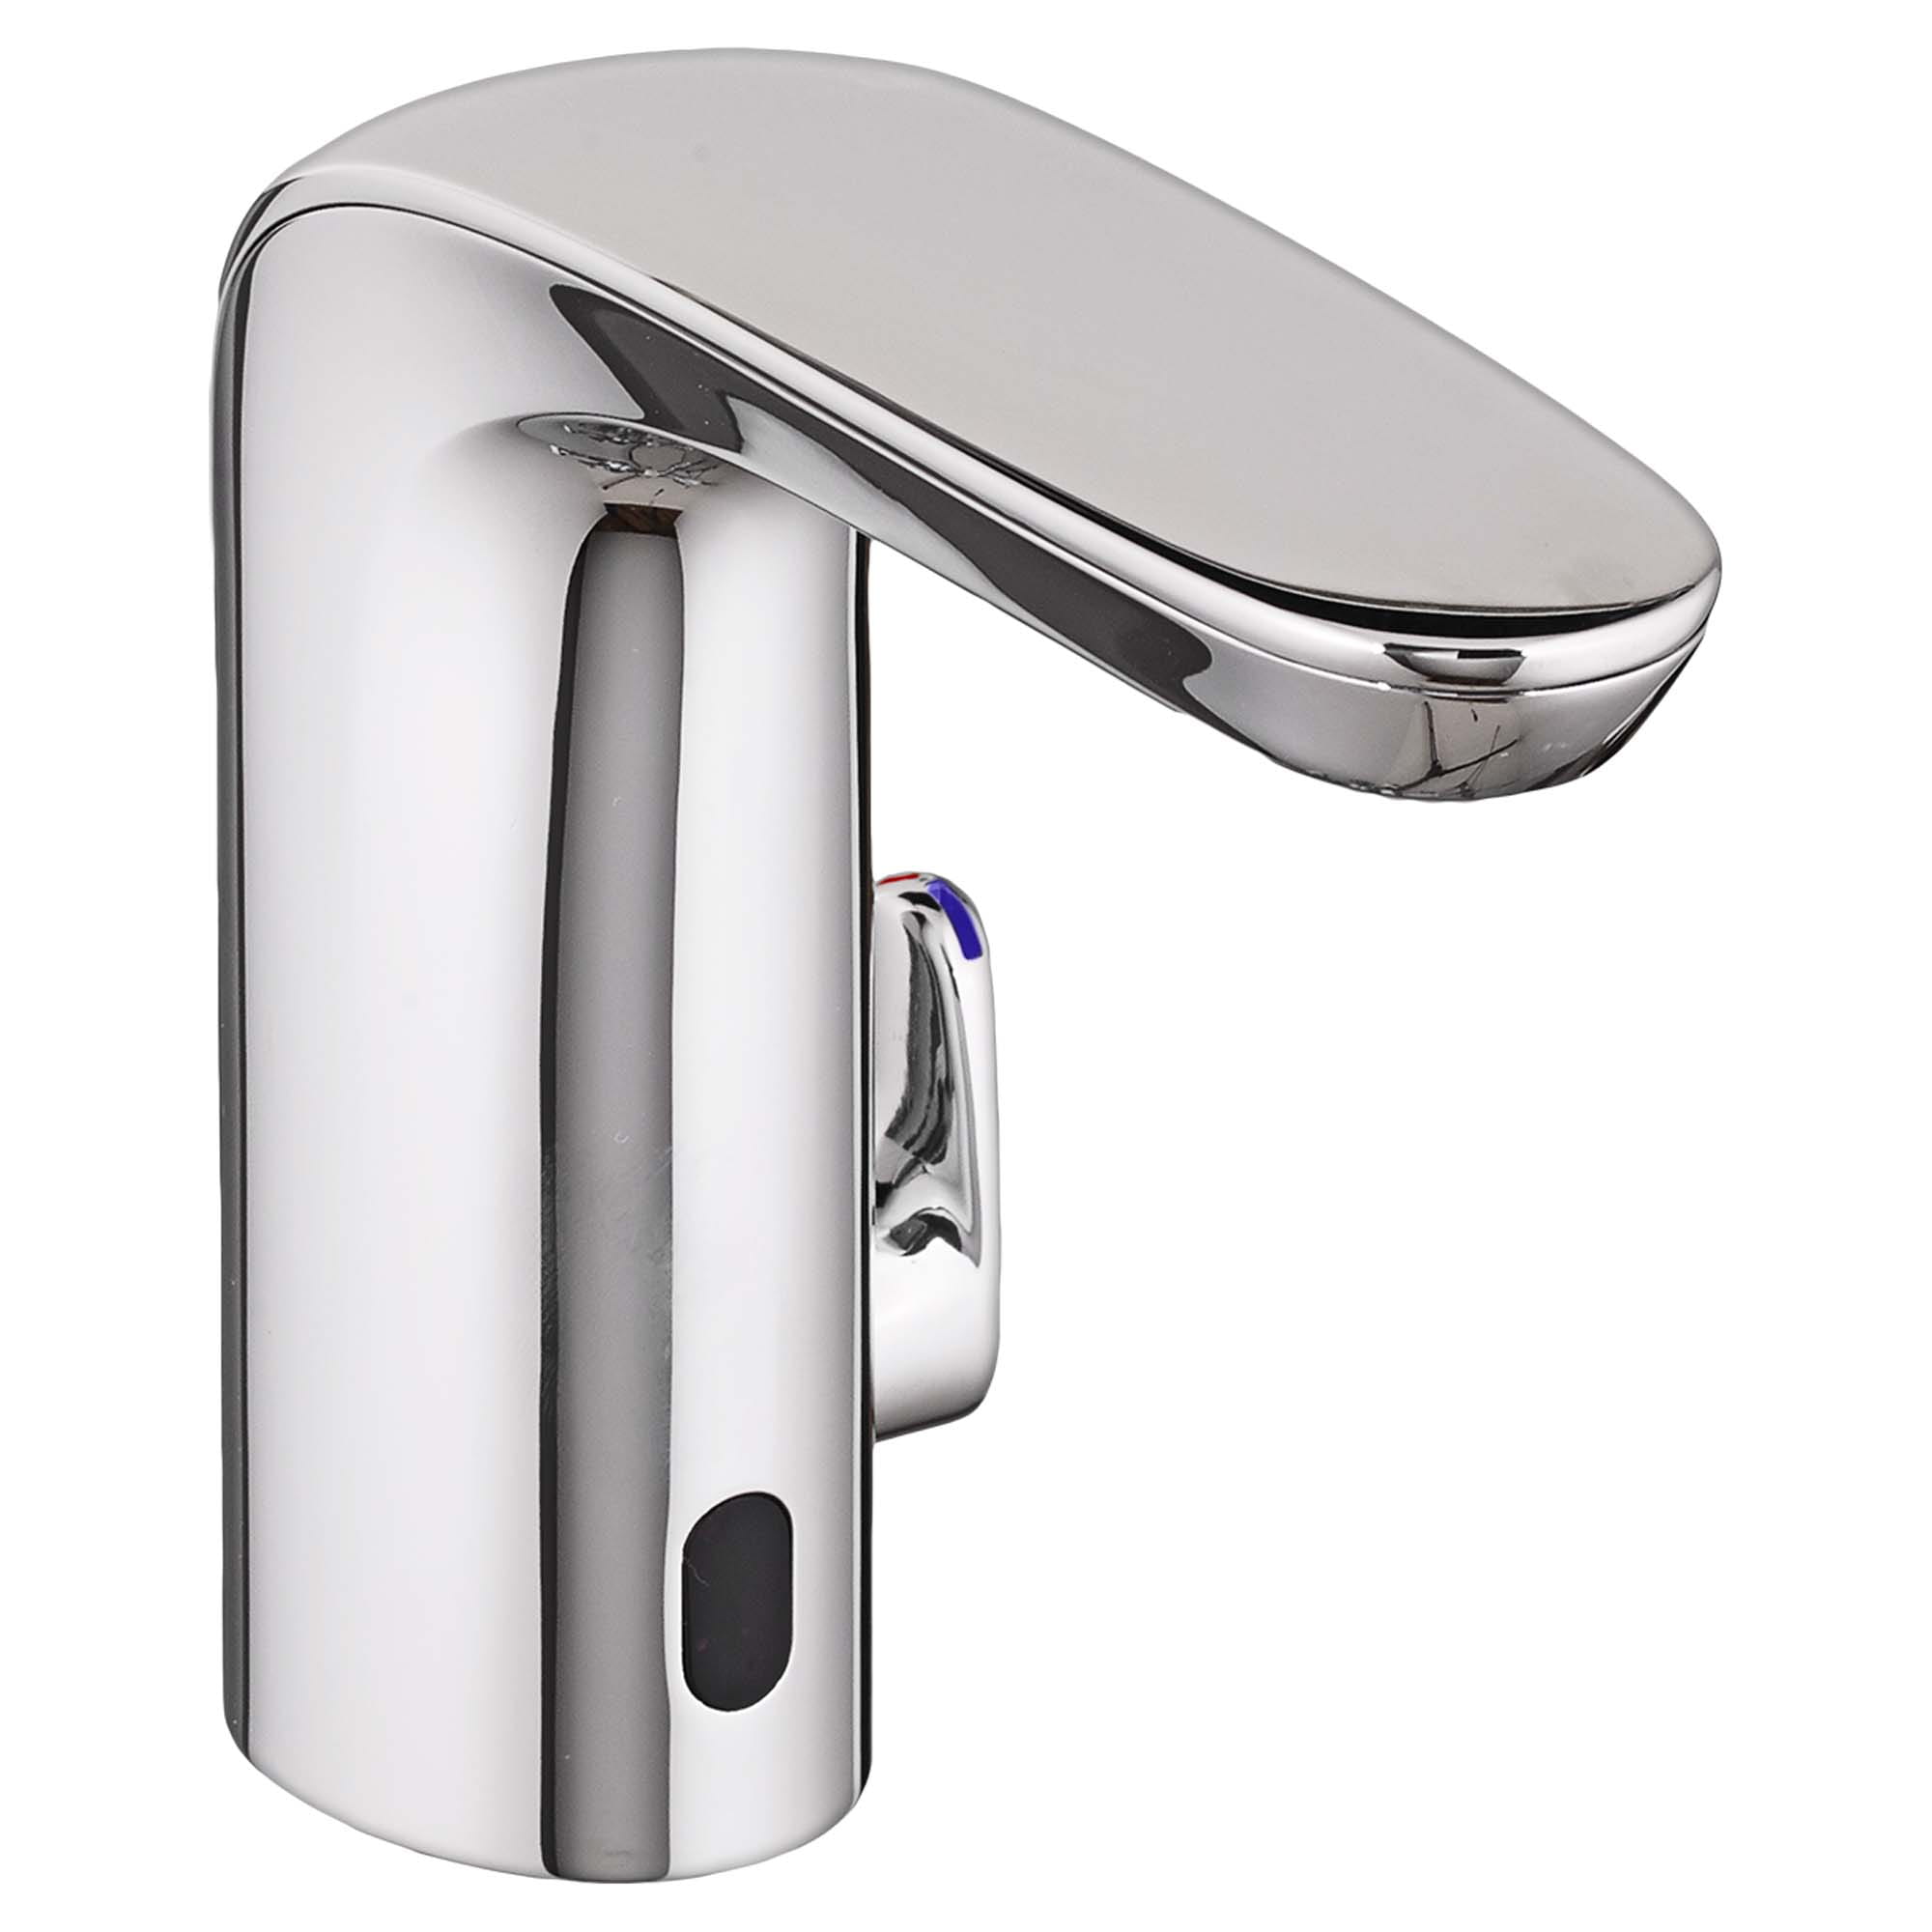 NextGen Selectronic Touchless Faucet Battery Powered With SmarTherm Safety Shut Off  Plus  ADM 15 gpm 57 Lpm CHROME